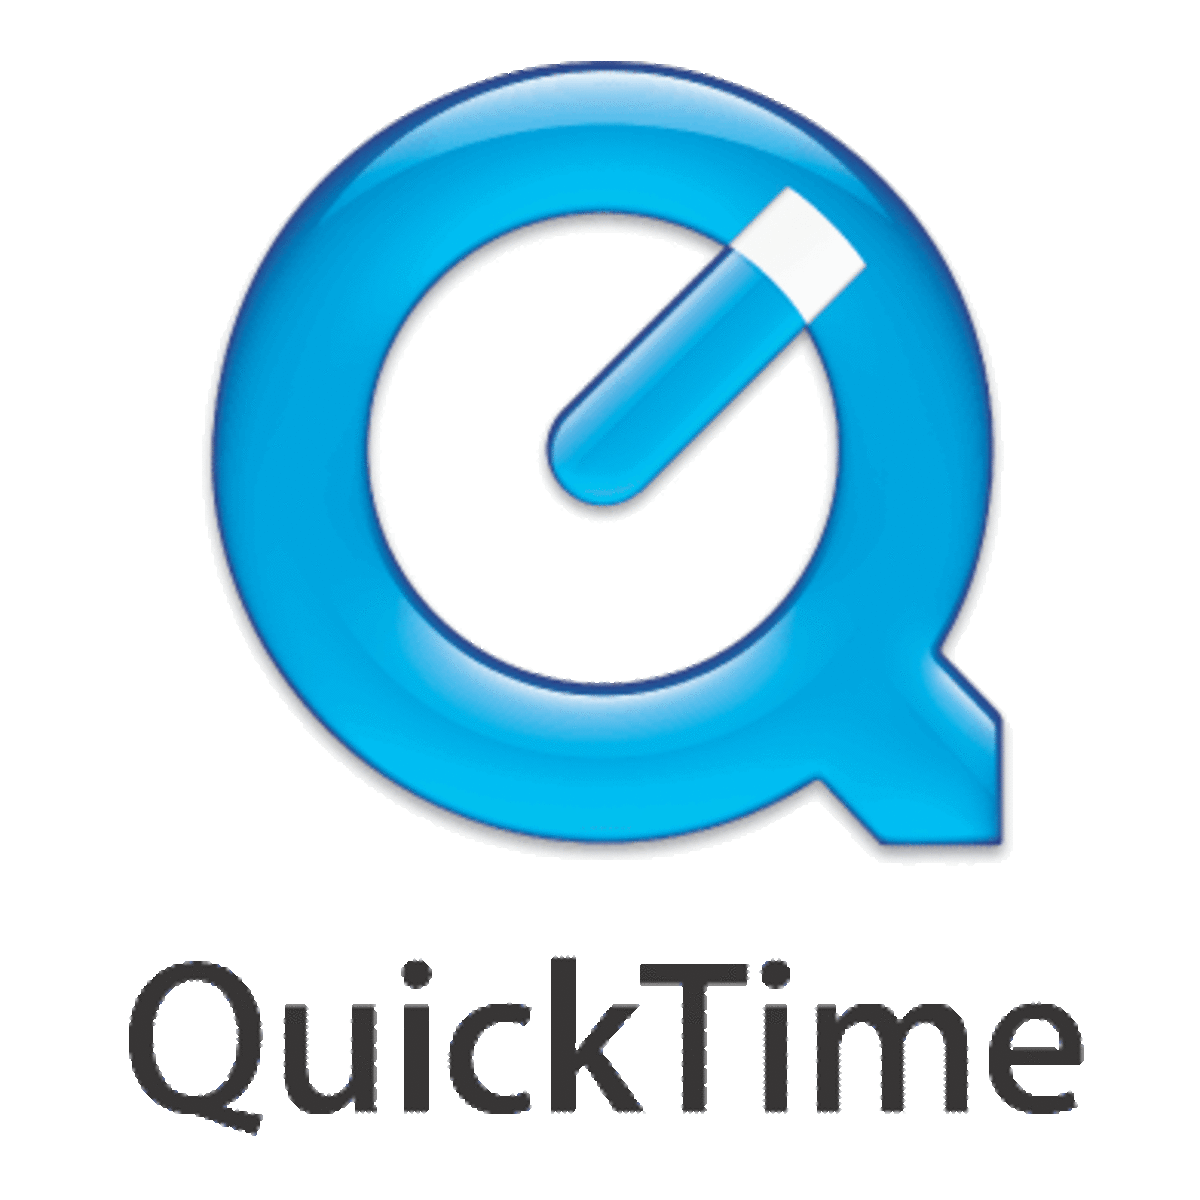 latest version of quicktime pro for mac